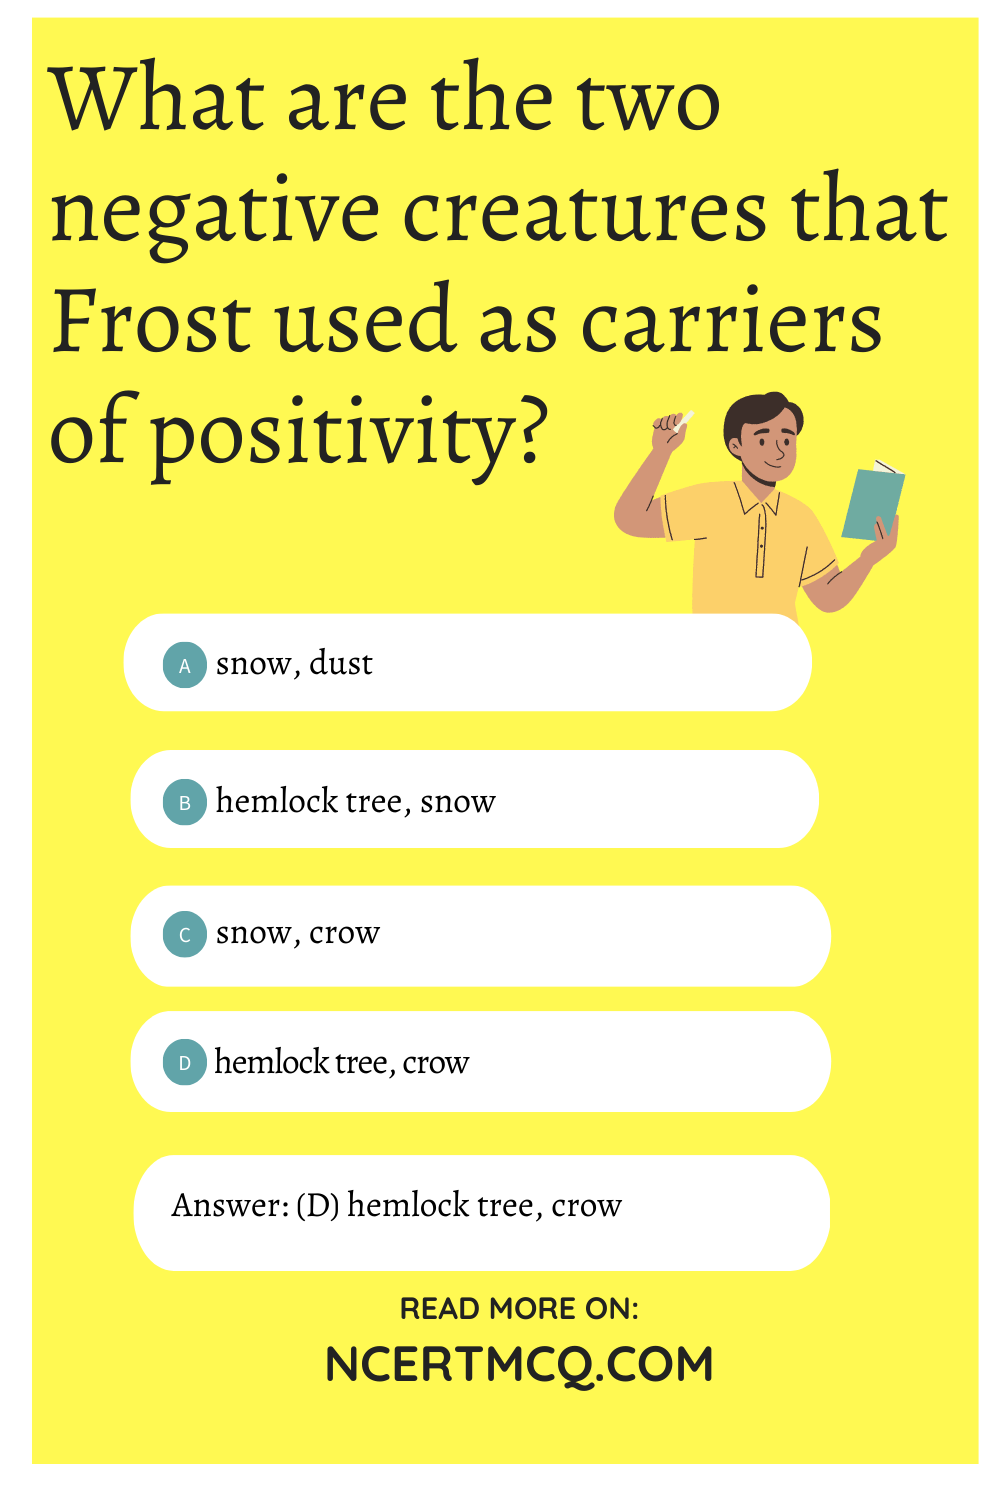 What are the two negative creatures that Frost used as carriers of positivity?